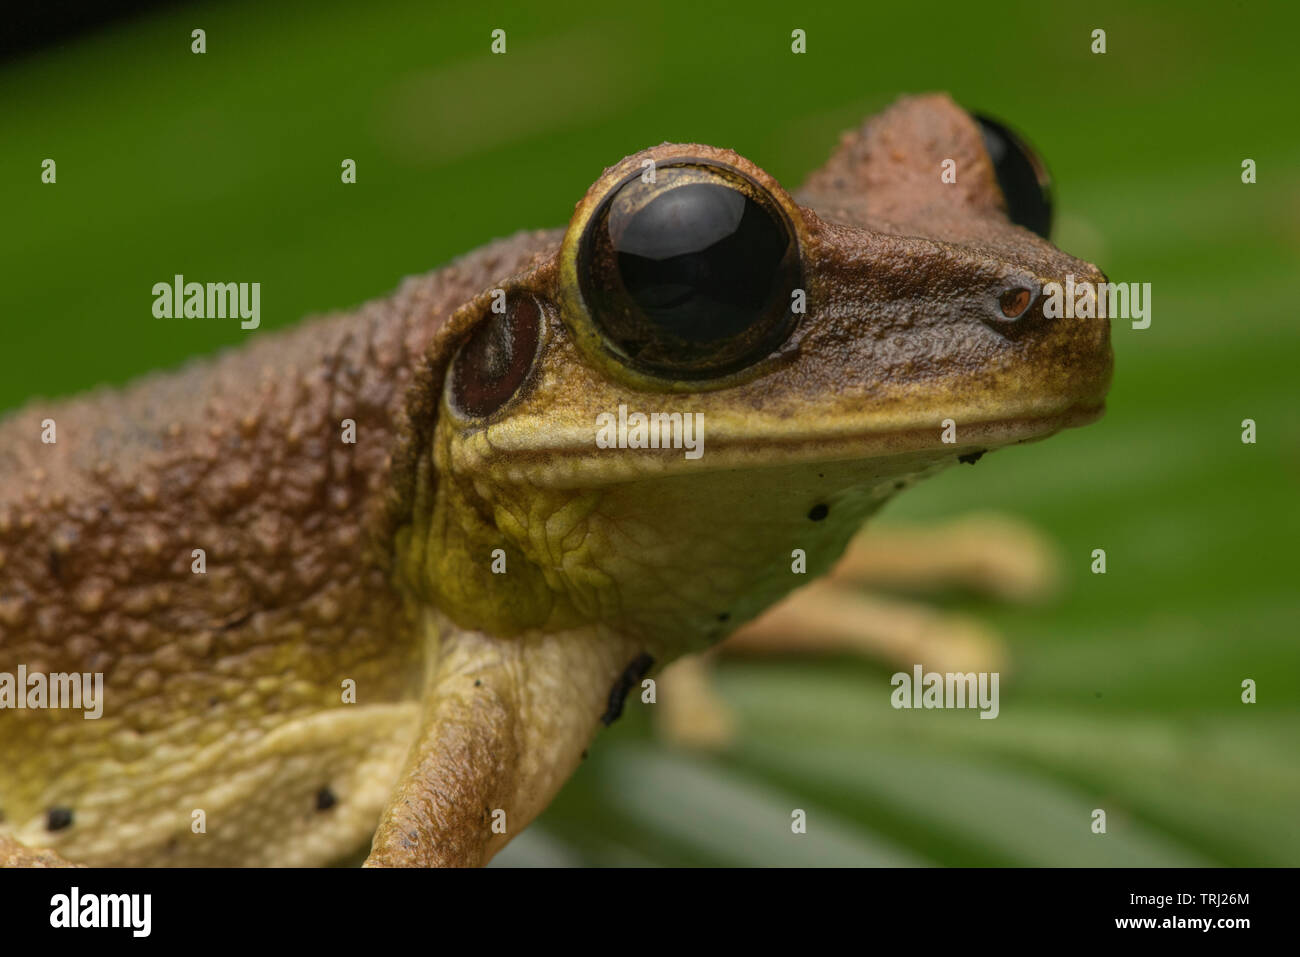 A close up of a tree frog from the Amazon jungle, a treefrog in the Osteocephalus genus. Stock Photo